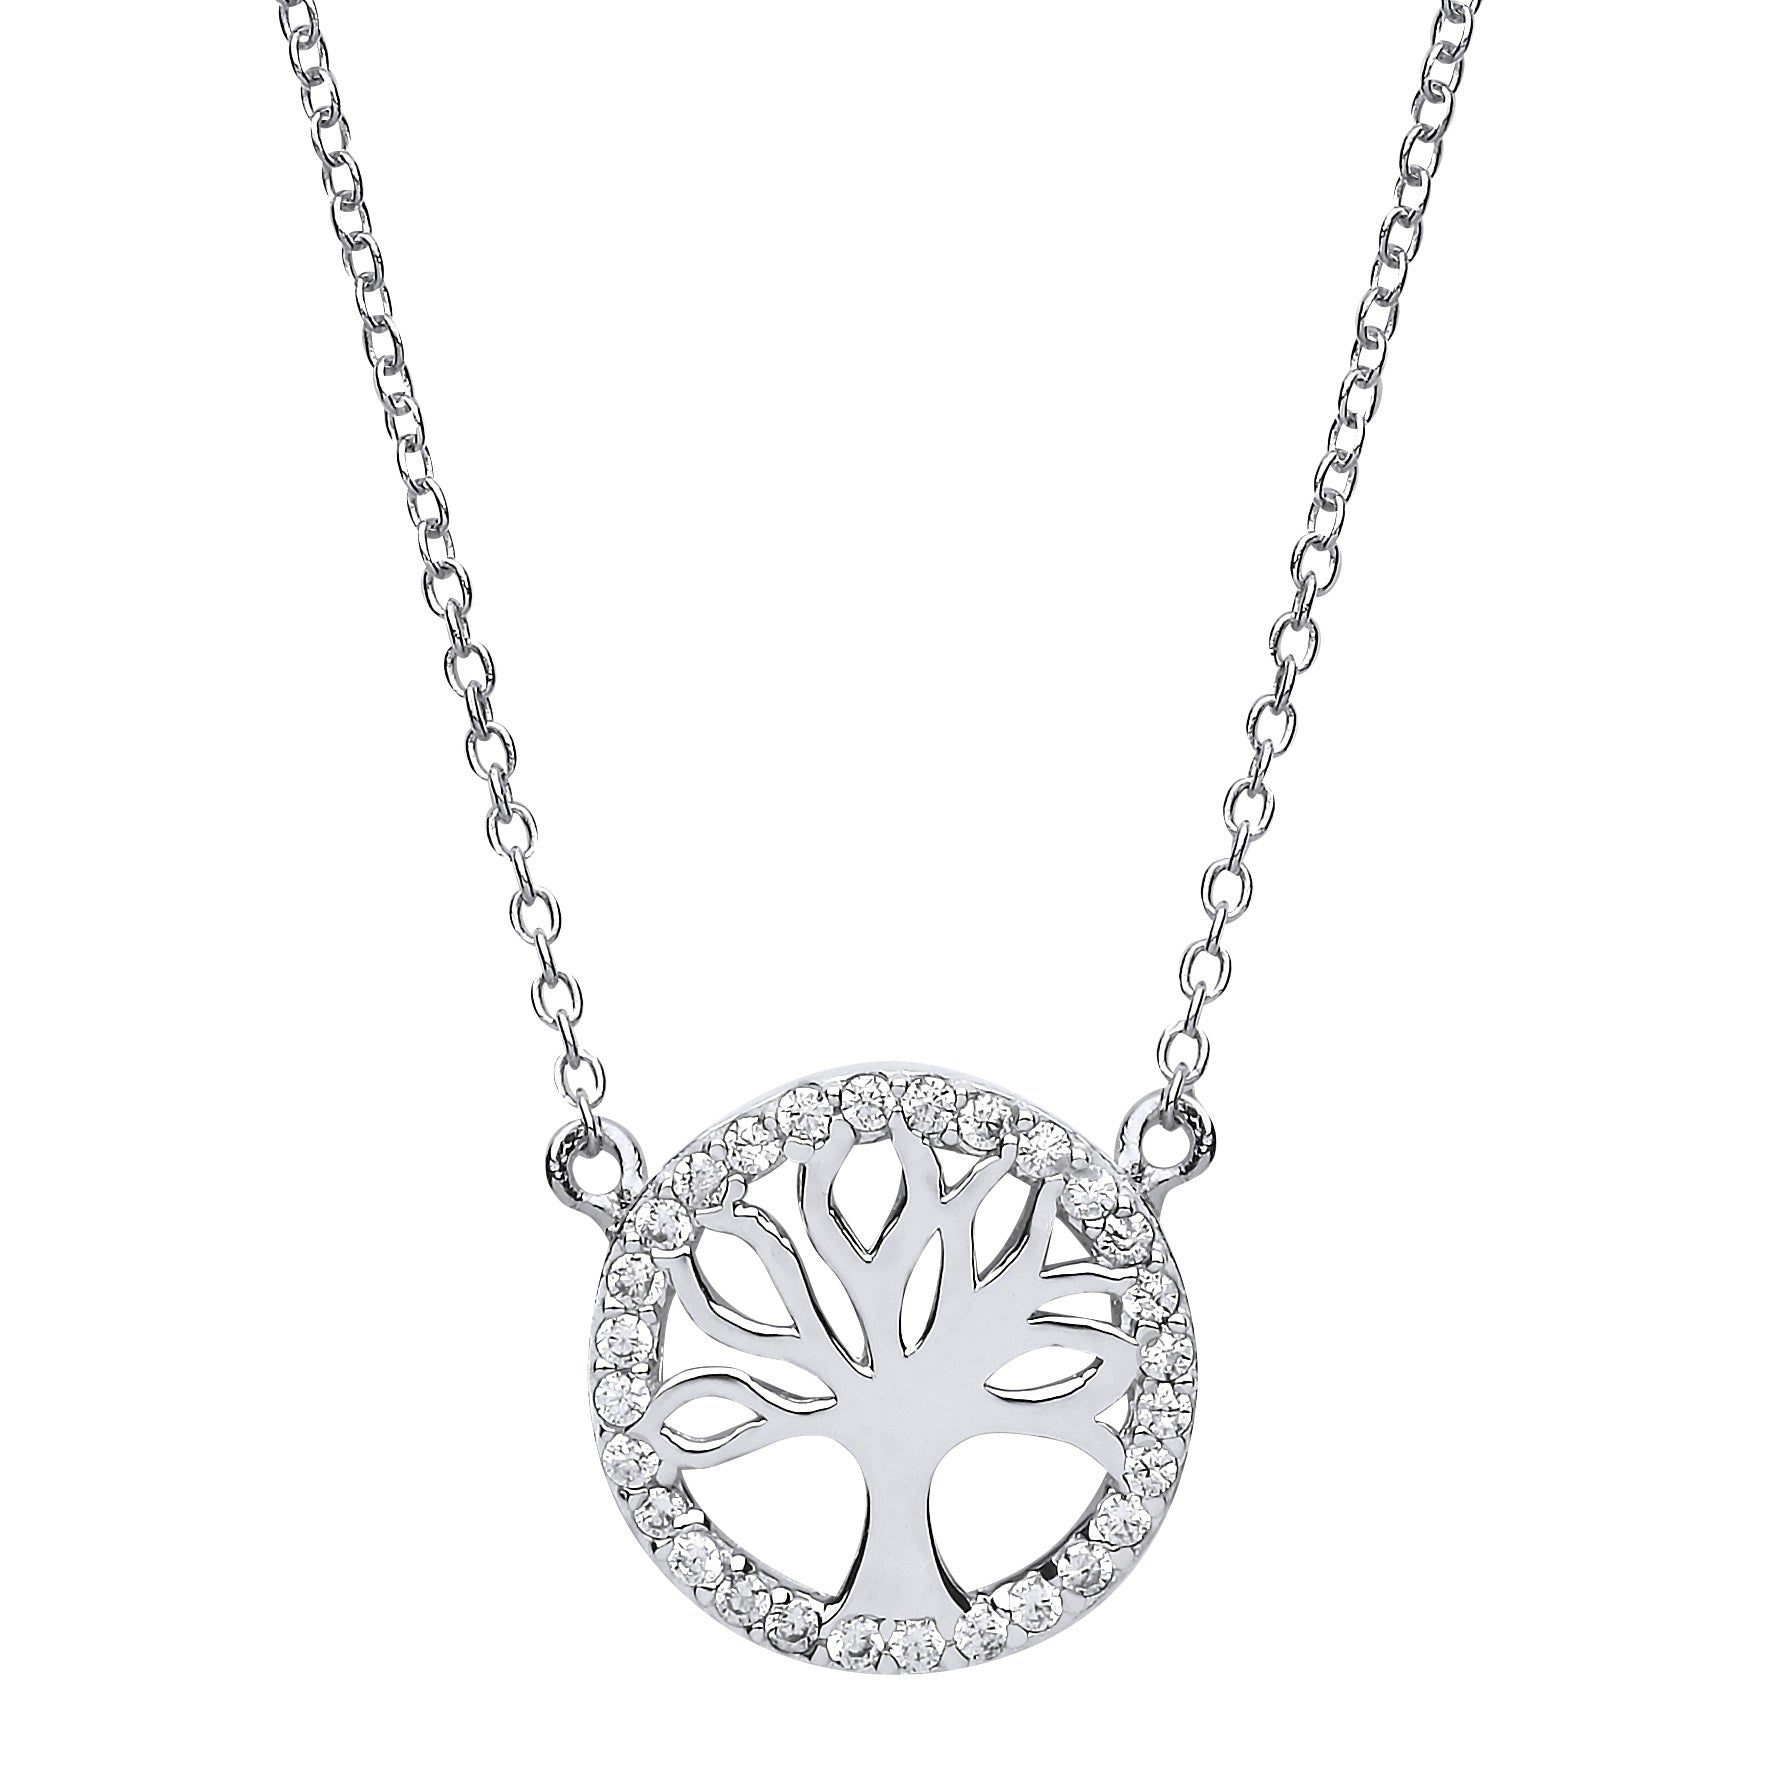 Silver  CZ Tree of Life Charm Necklace 16 + 2 inch - GVK160